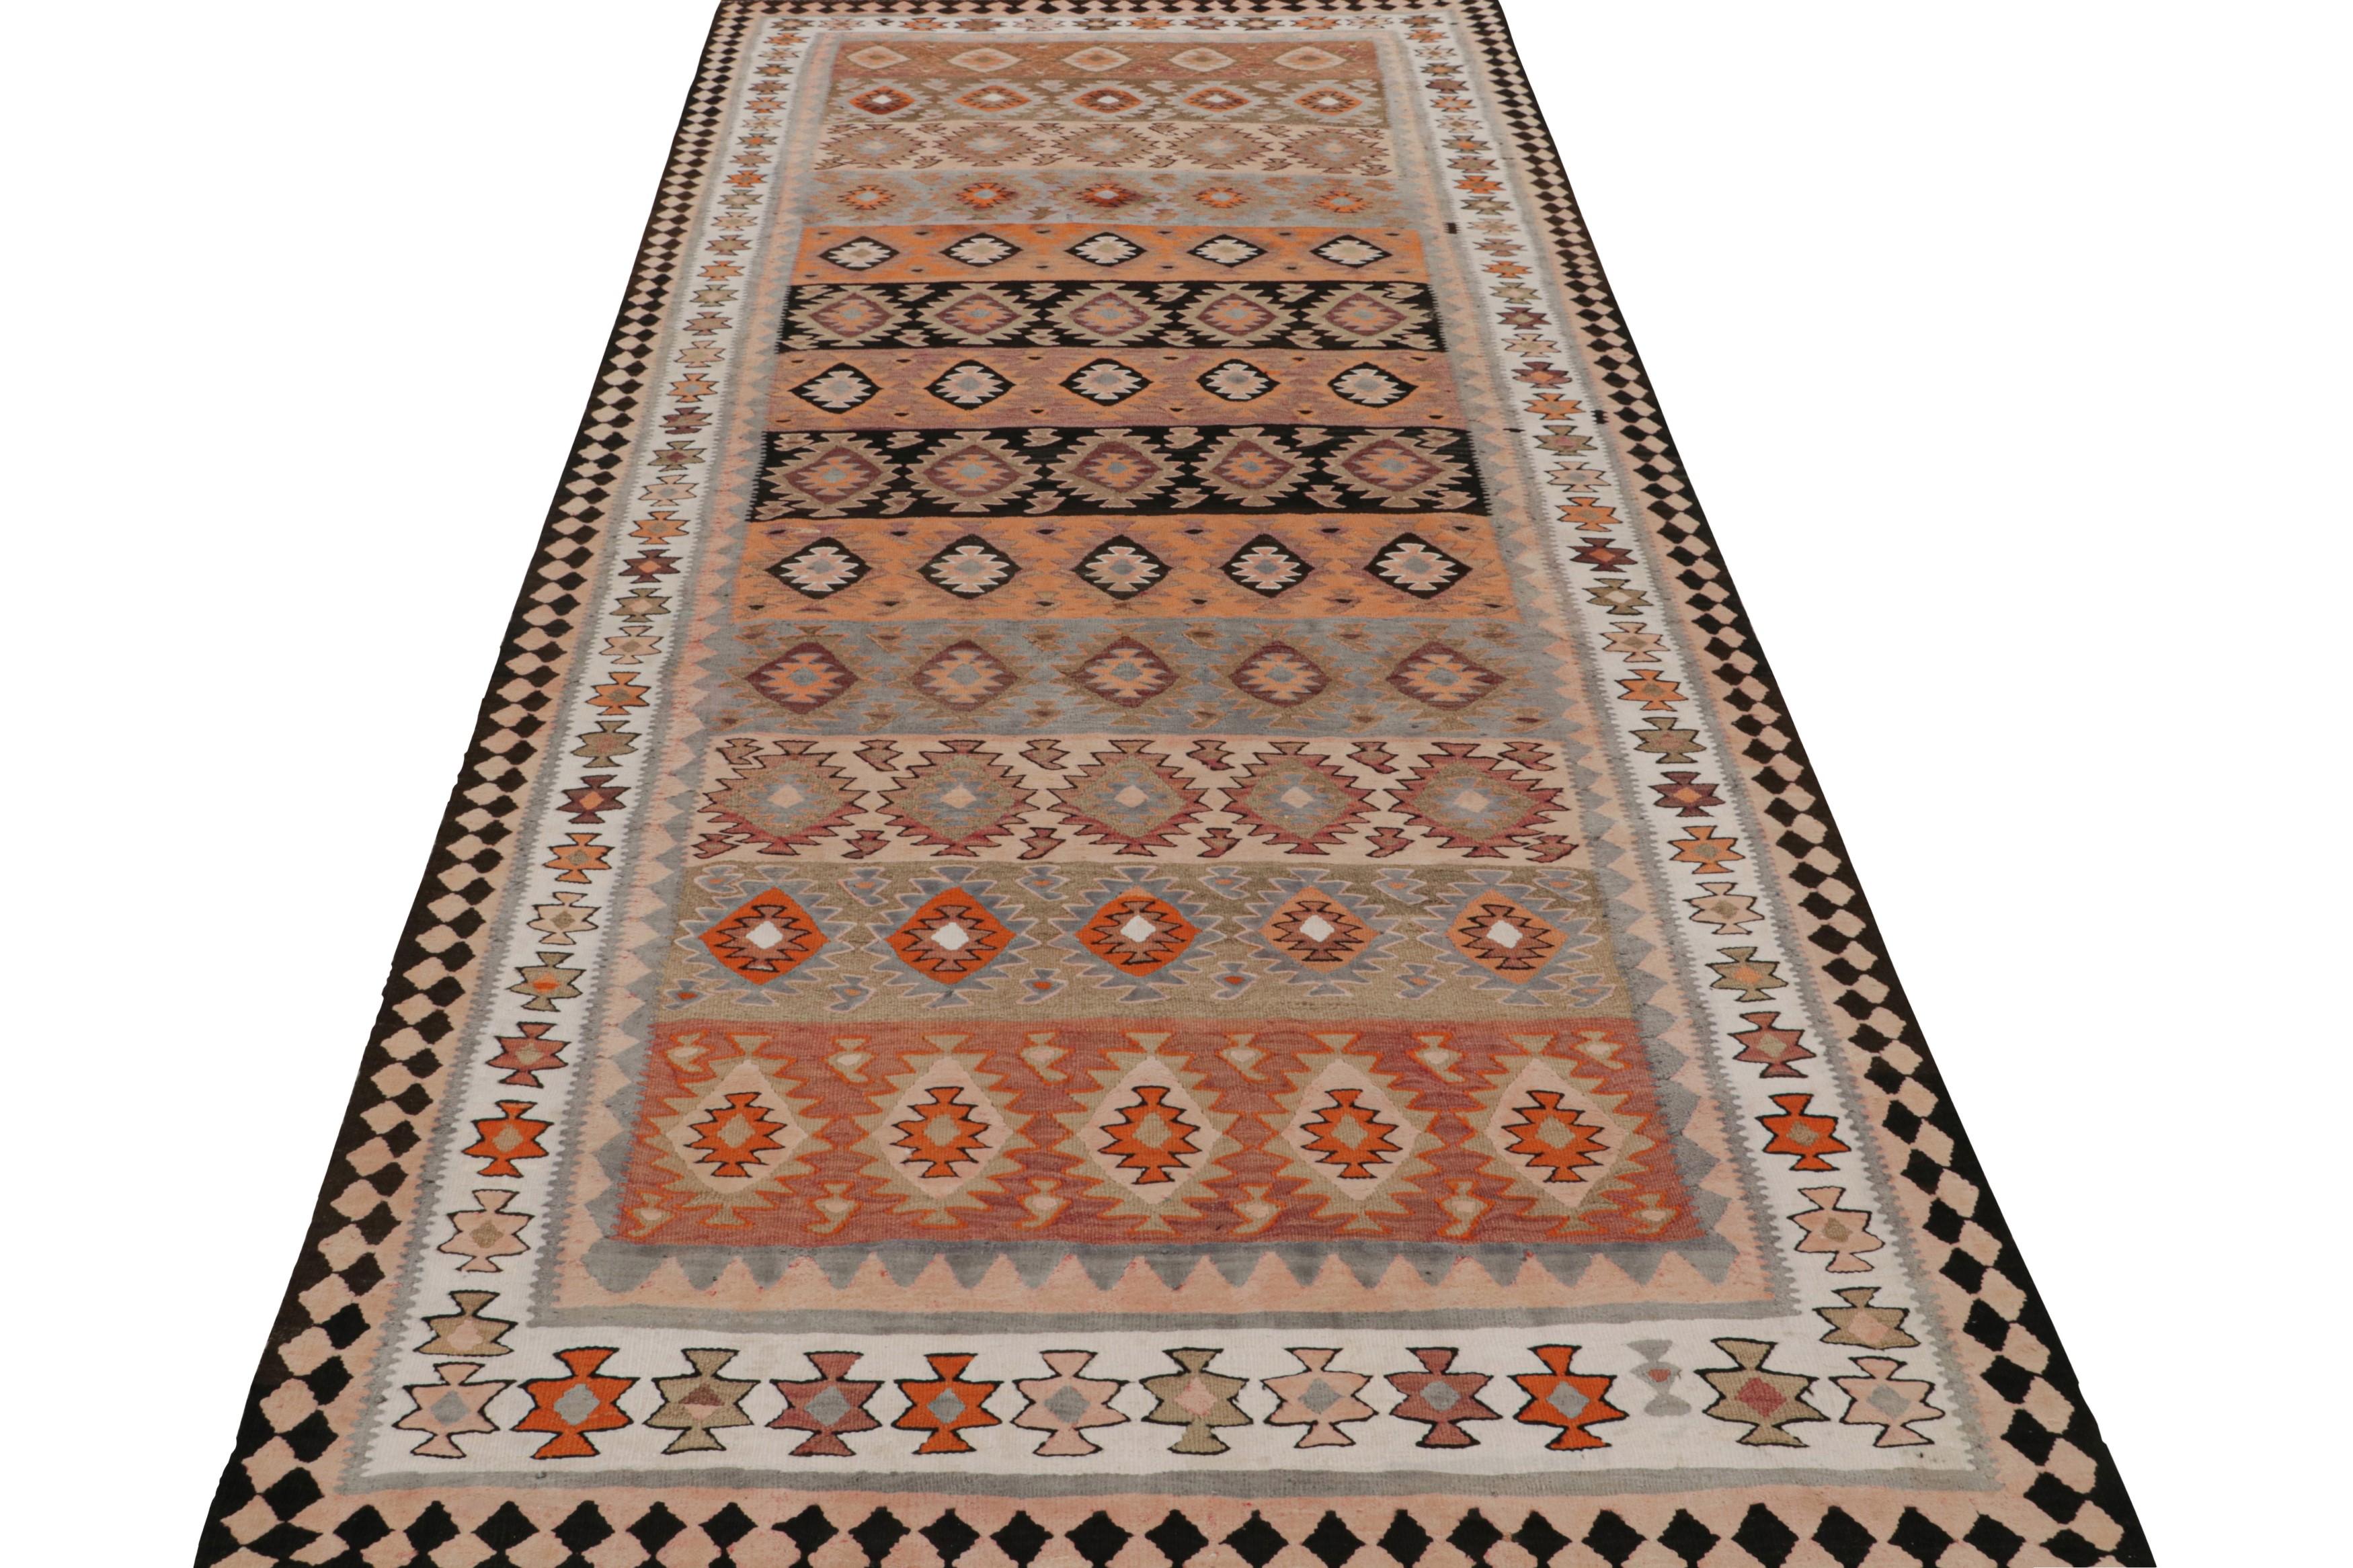 Hand-Woven Vintage Afghan Tribal Kilim with Polychromatic Patterns by Rug & Kilim For Sale